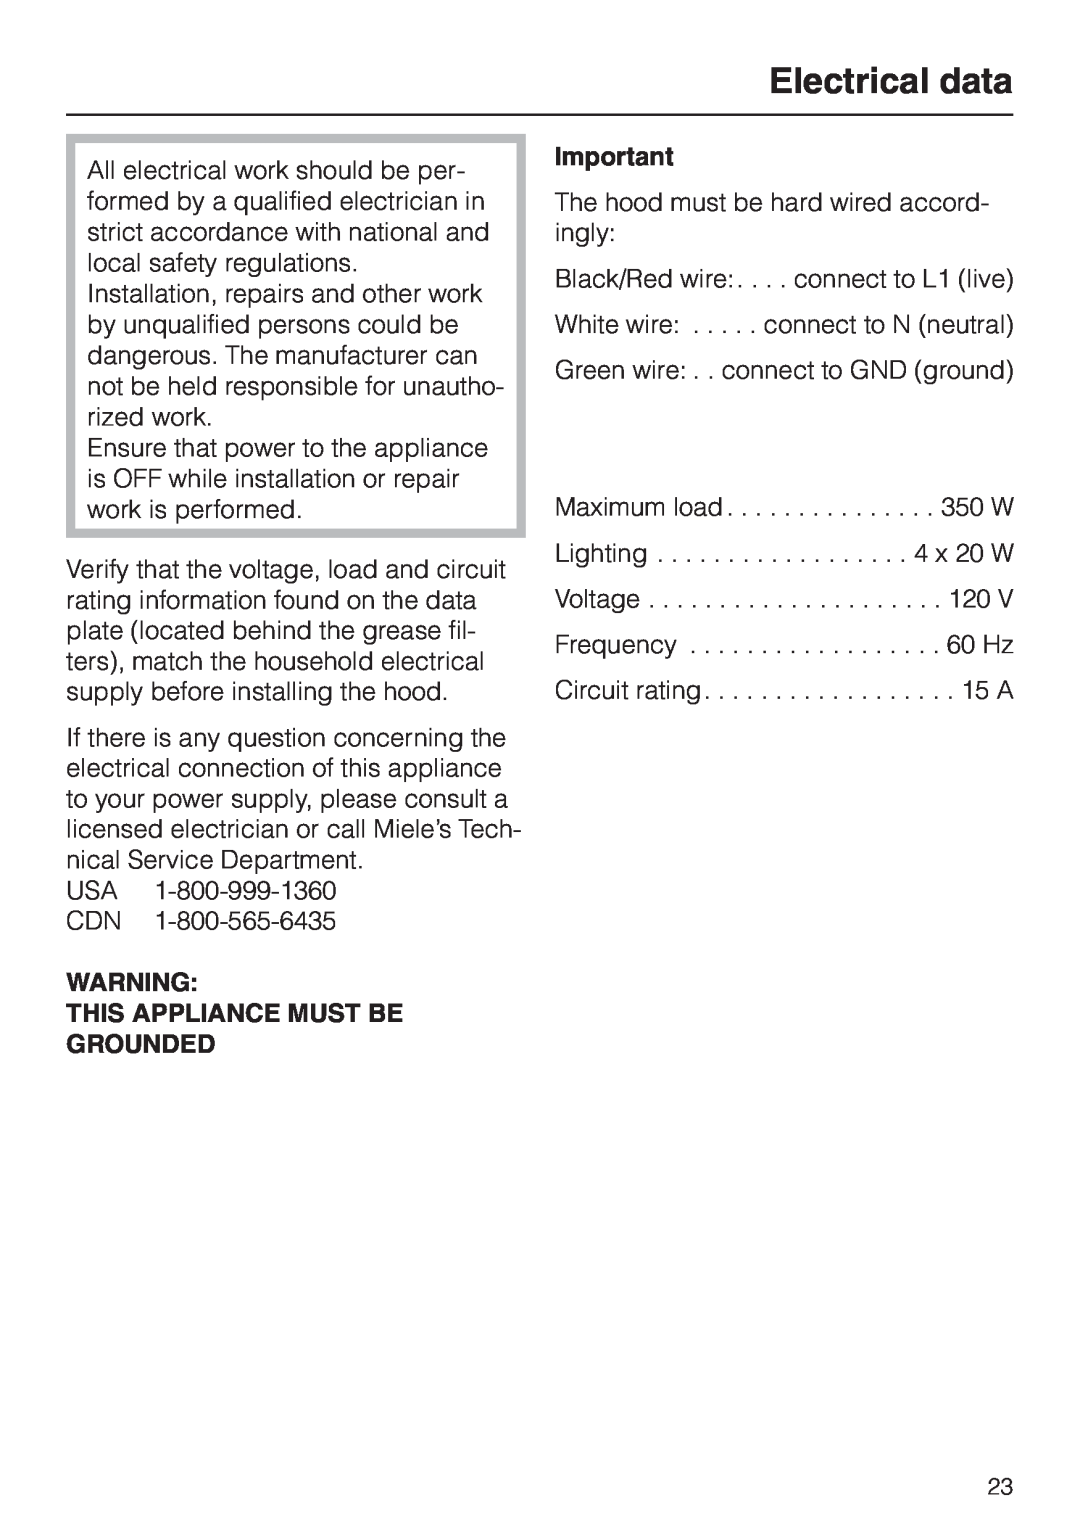 Miele DA 230-3 installation instructions Electrical data, This Appliance Must Be Grounded 